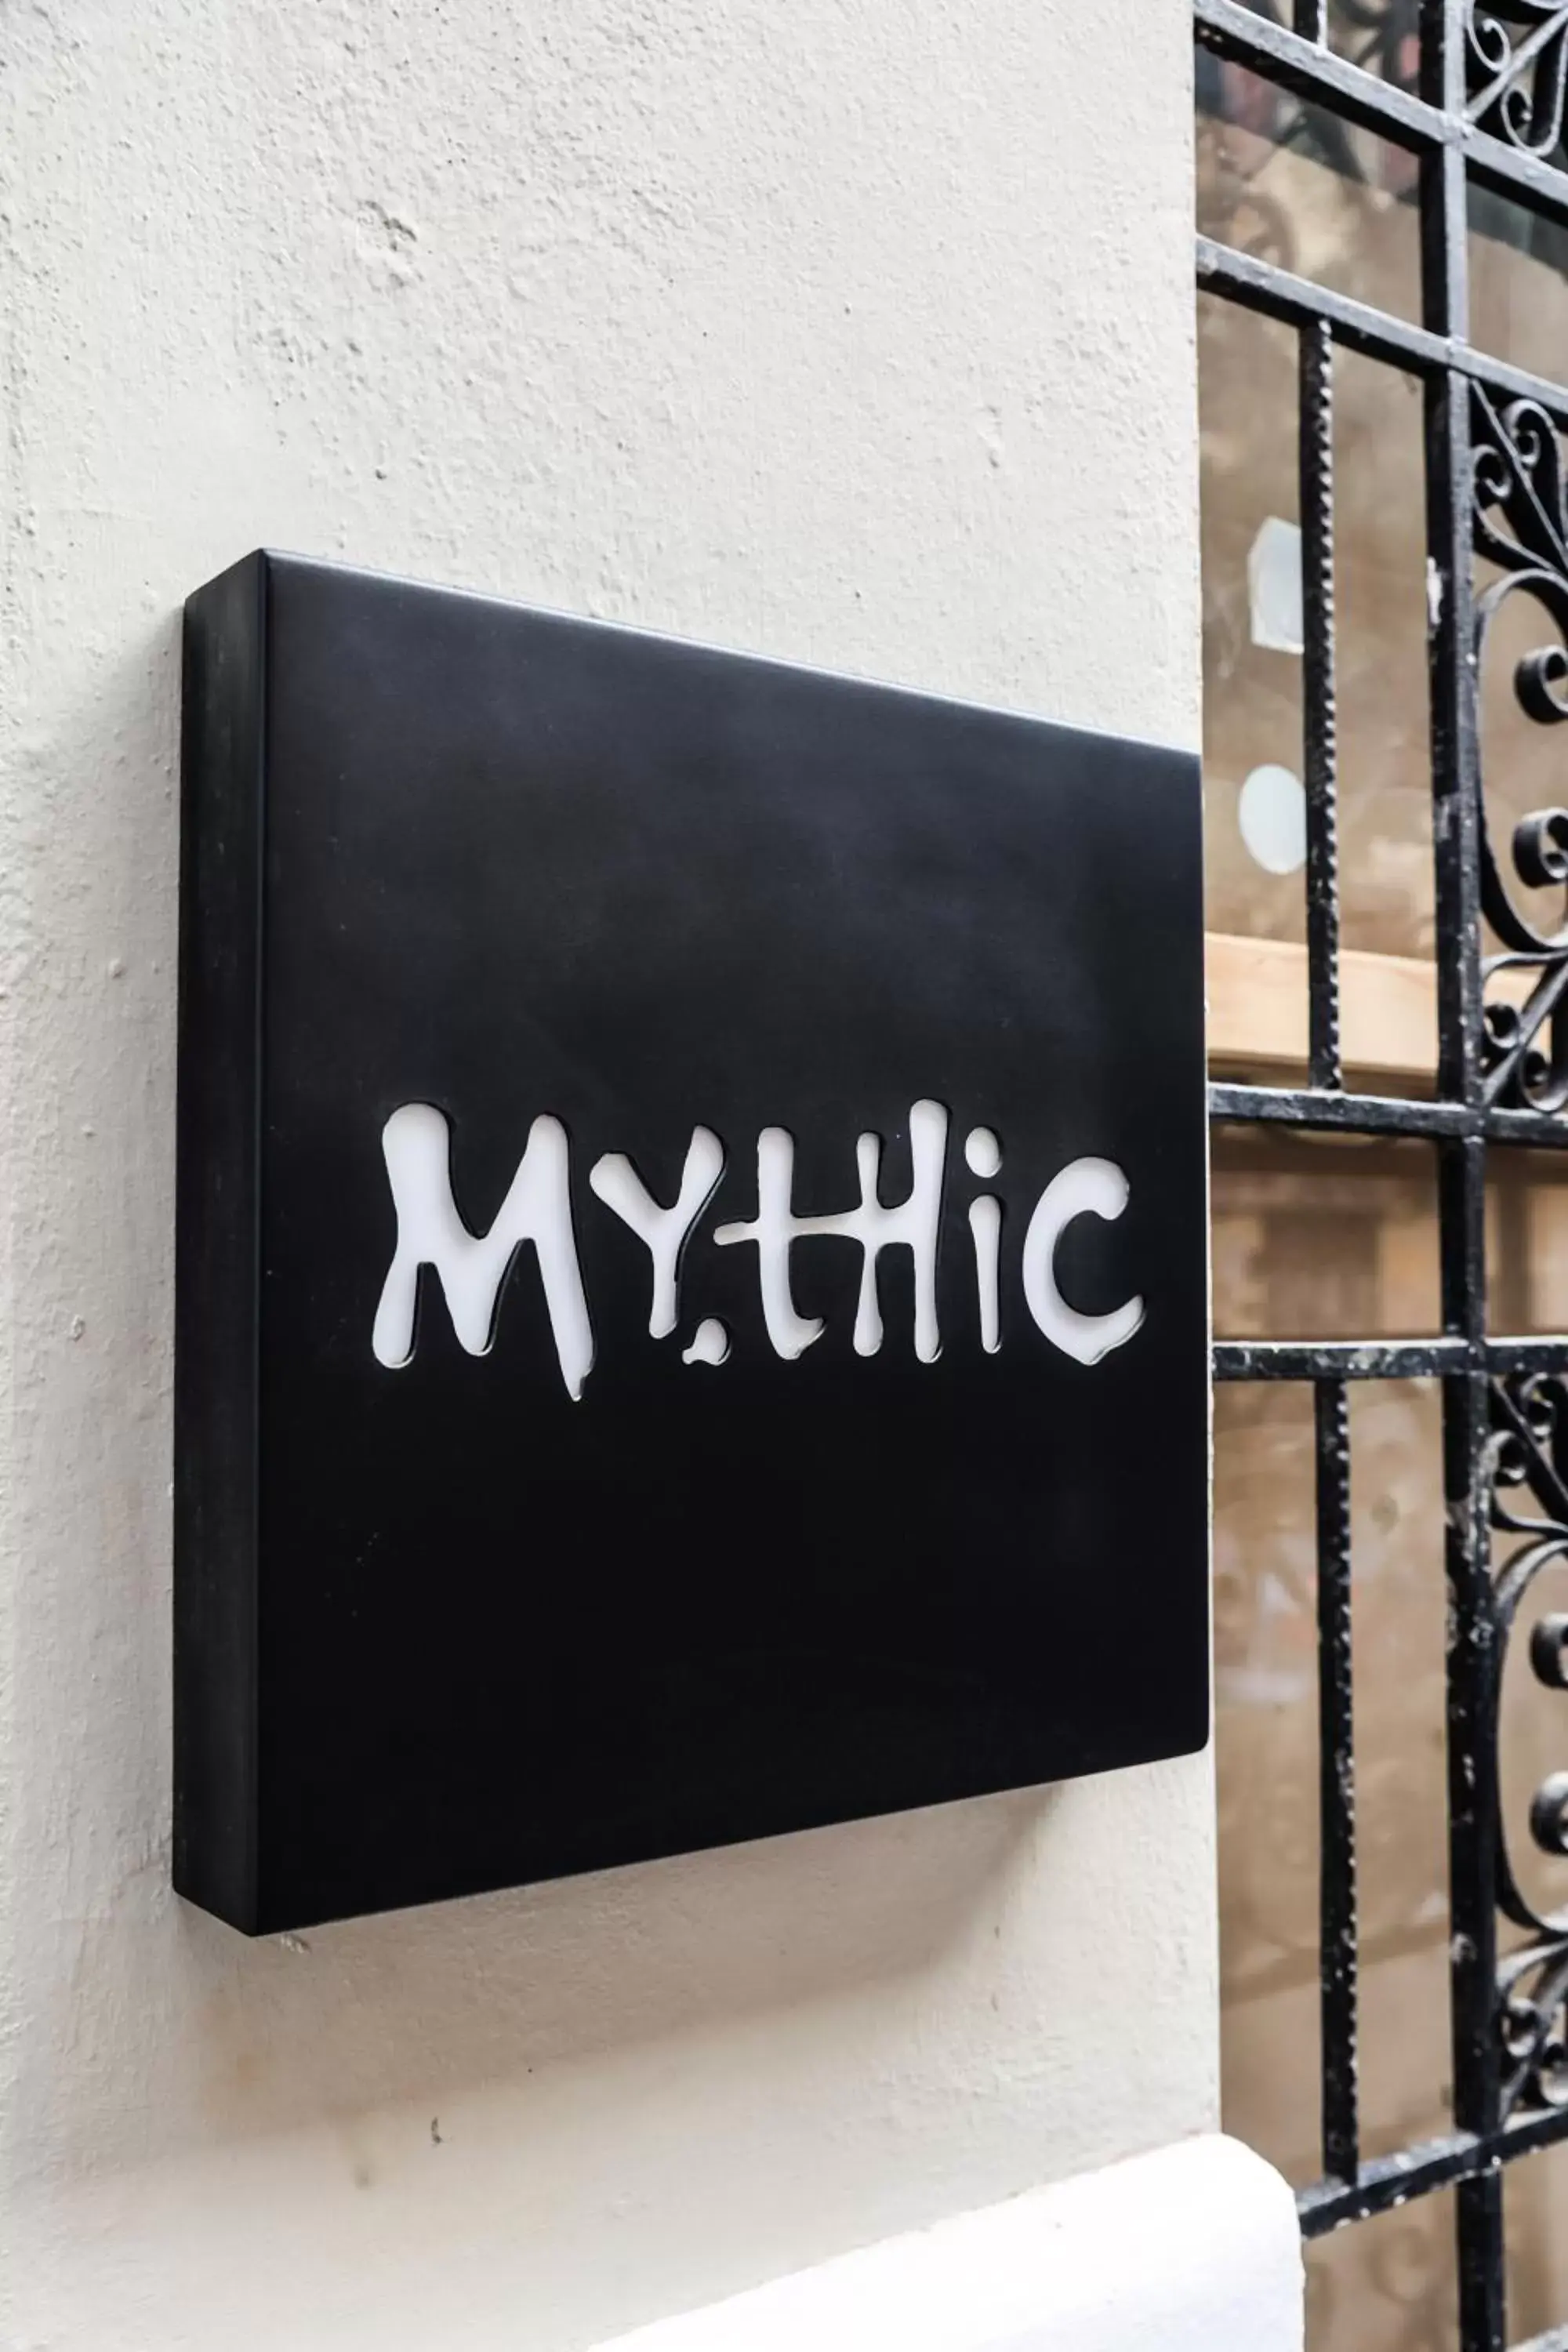 Property building in Mythic Valencia